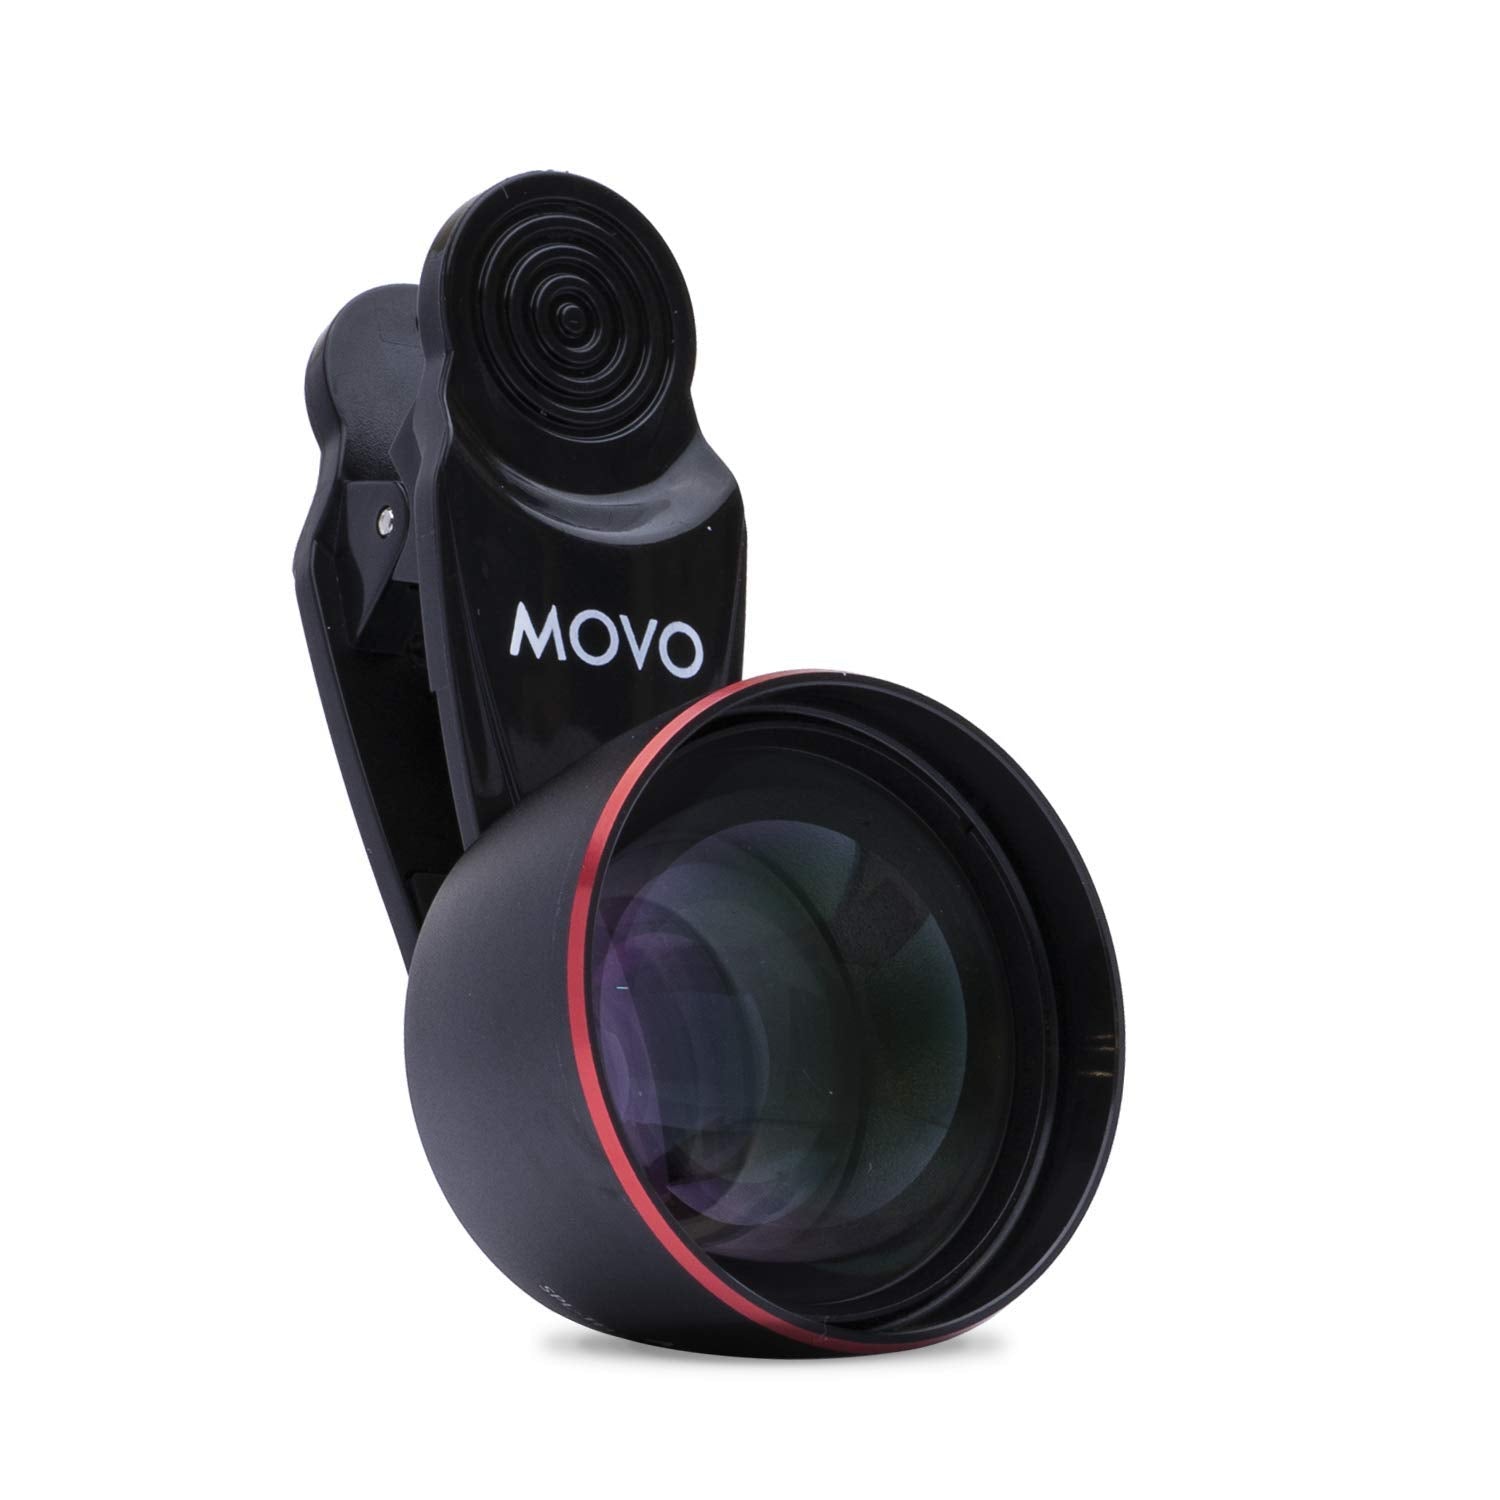 Movo SPL-Tele 3X Telephoto Lens with Clip Mount for Smartphones - Zoom Lens for iPhone, Android, and Tablets - Smartphone Telescopic Lens for Video and Photography - Best Telephoto Lens for iPhone  - Good